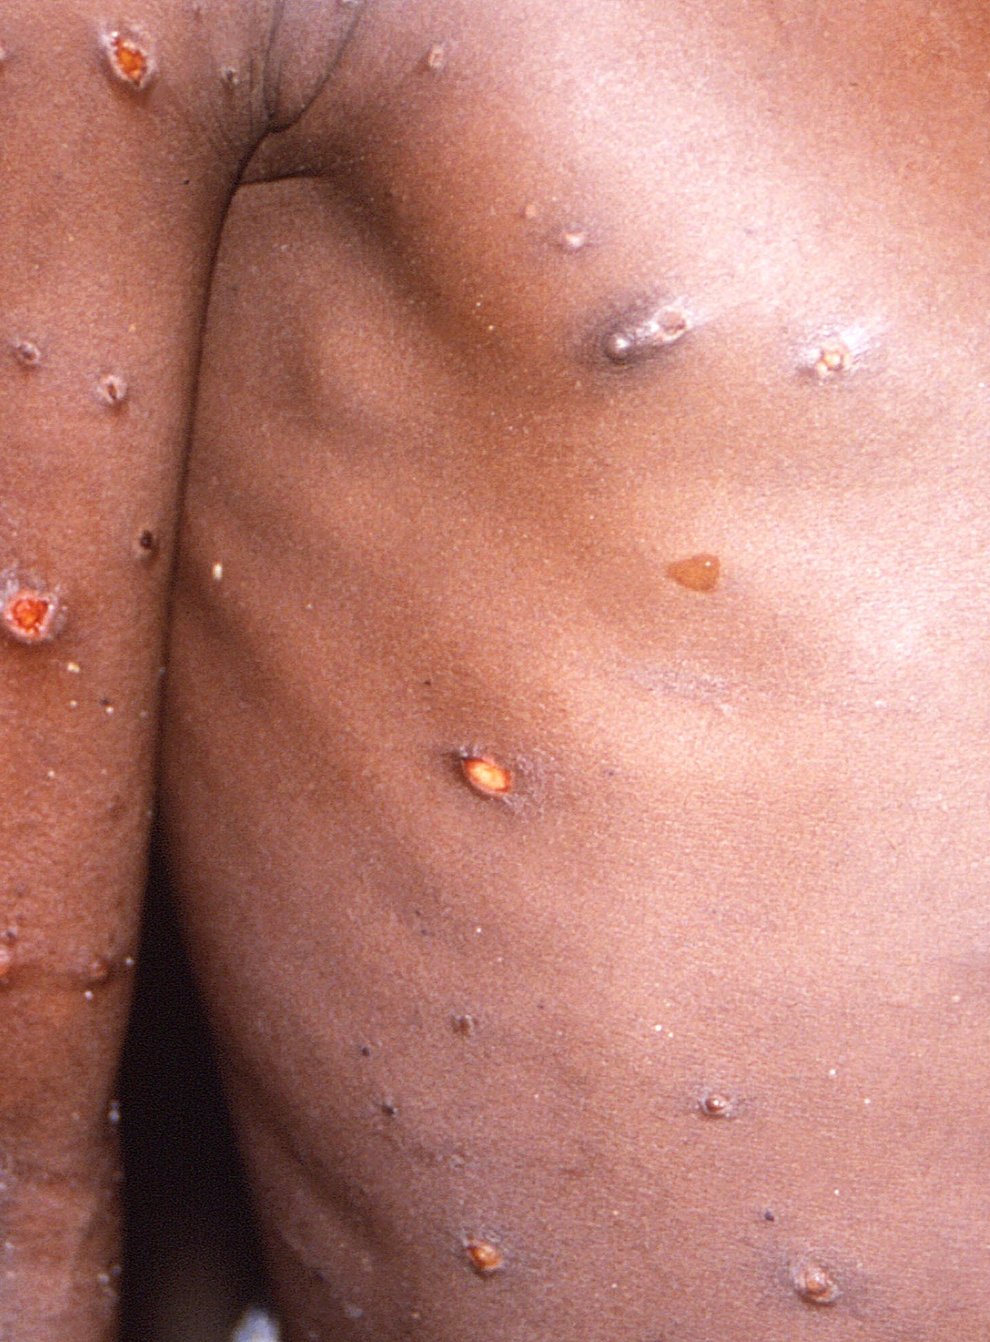 The monkeypox outbreak may be slowing, figures suggest (Brian W.J. Mahy/PA)